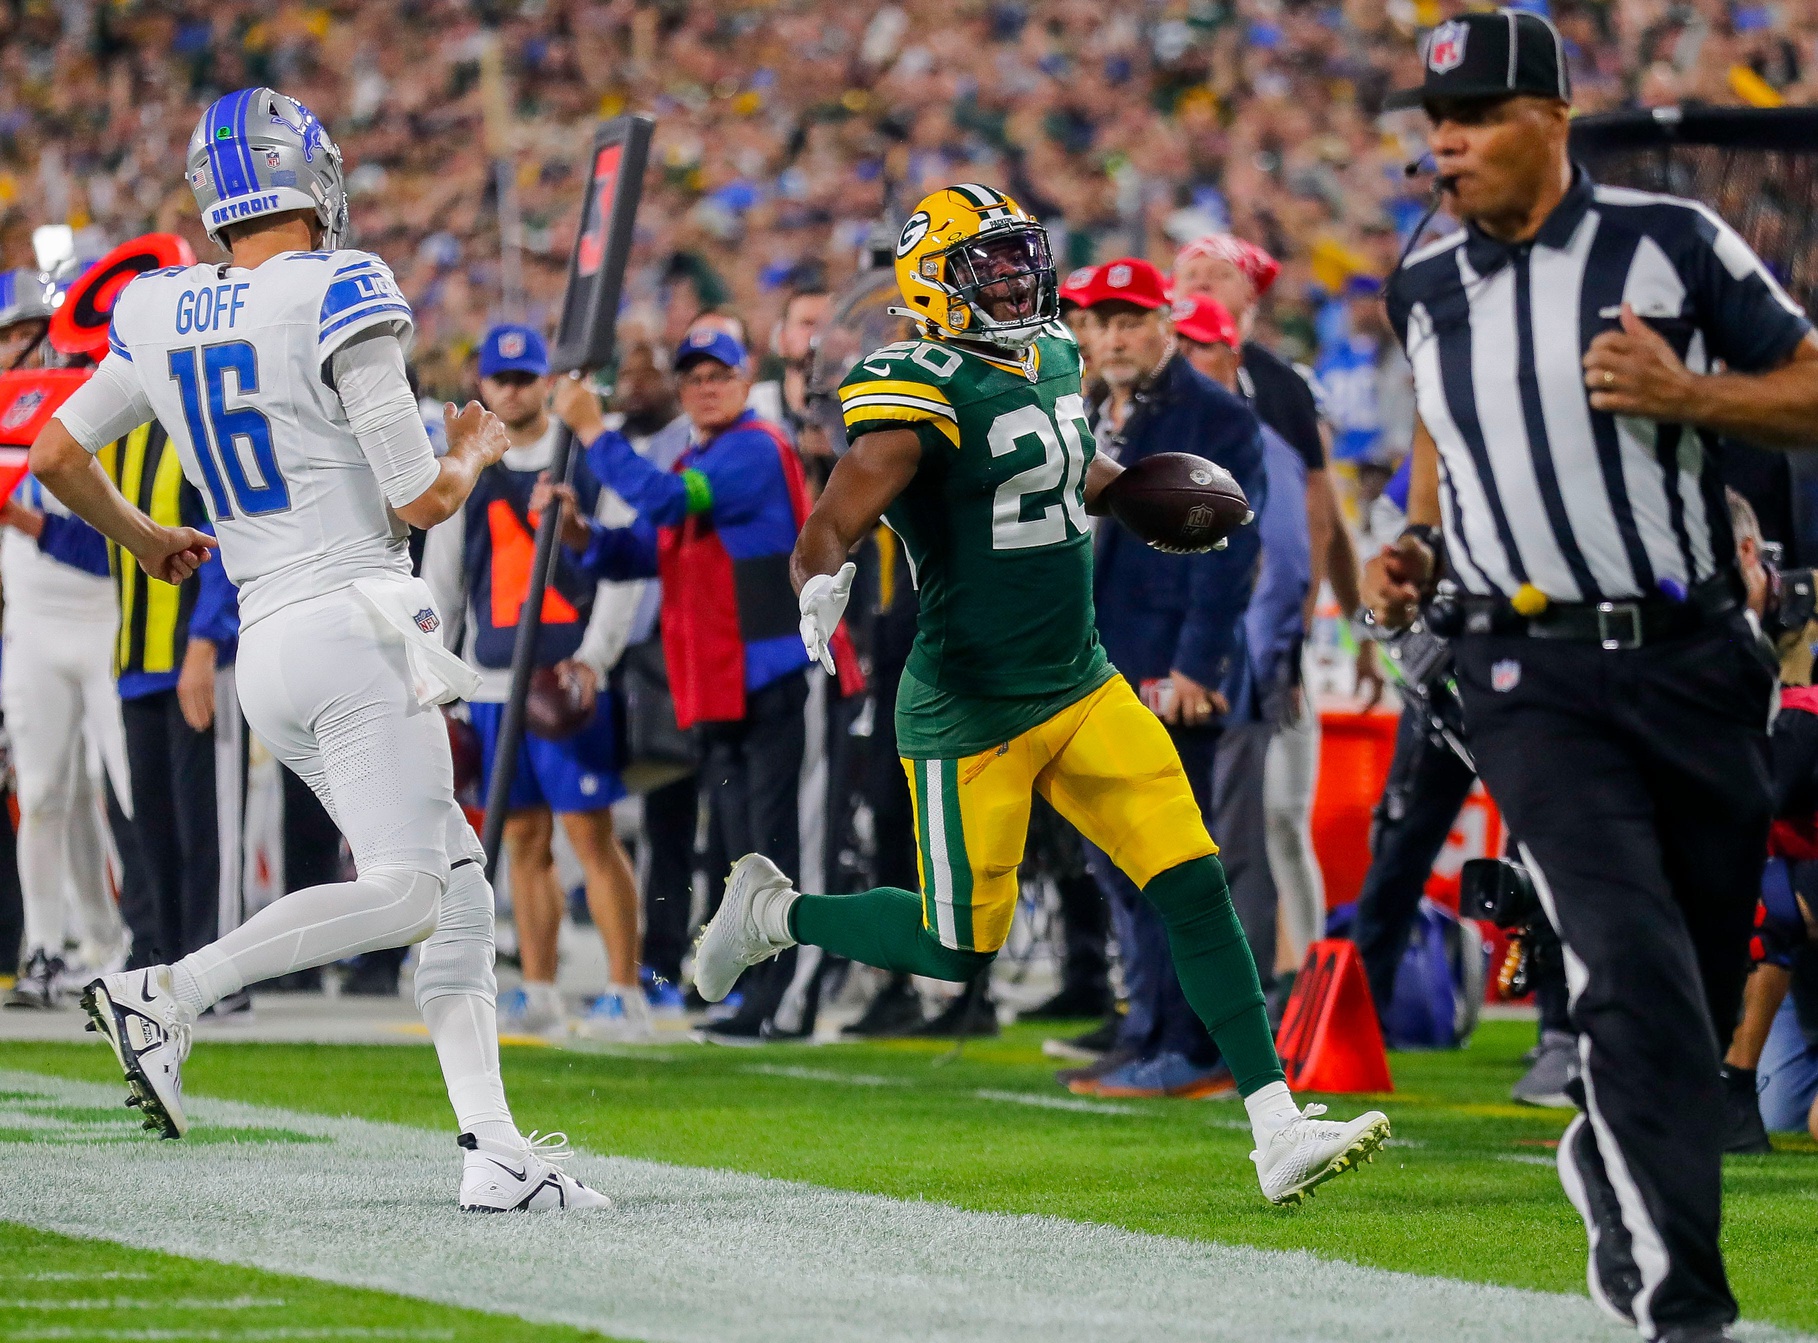 Rudy Ford (20) celebrates after intercepting a pass thrown by Detroit Lions quarterback Jared Goff (16).